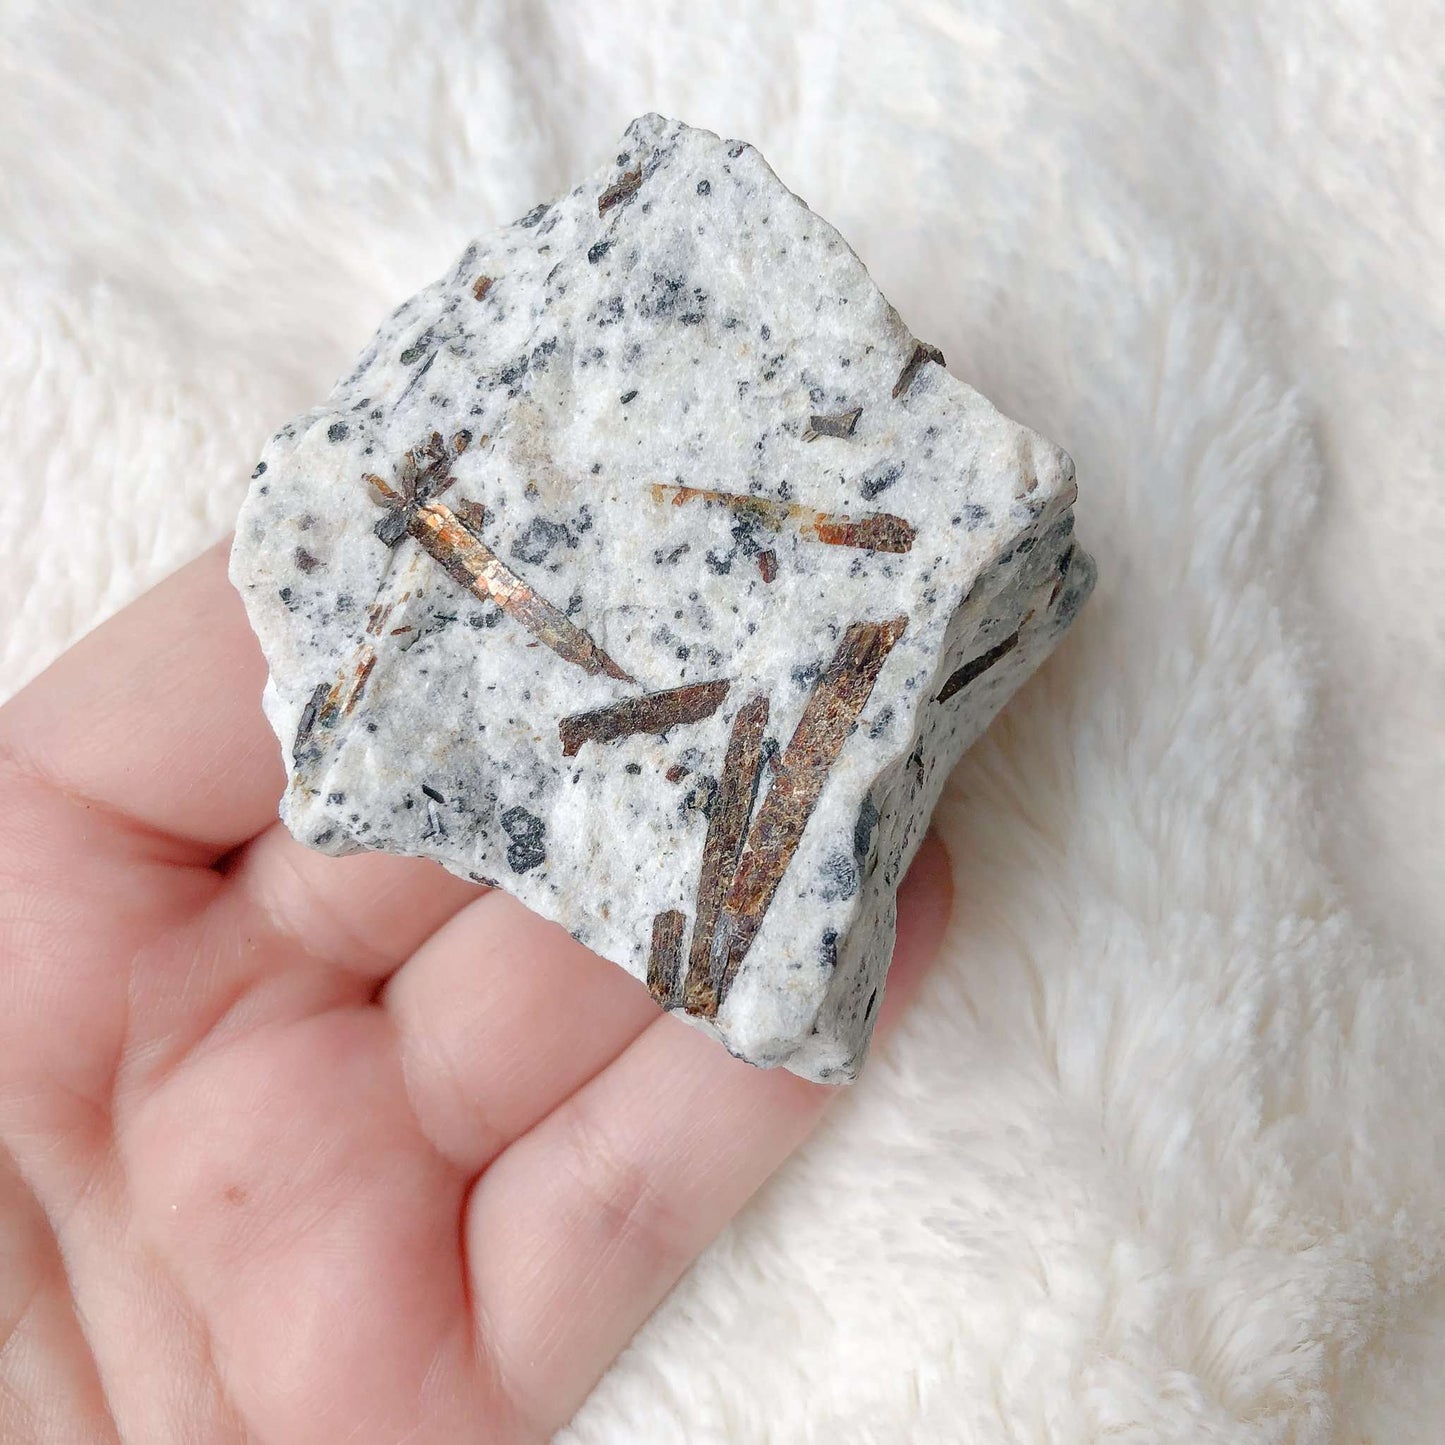 Rare and White Astrophyllite in hand